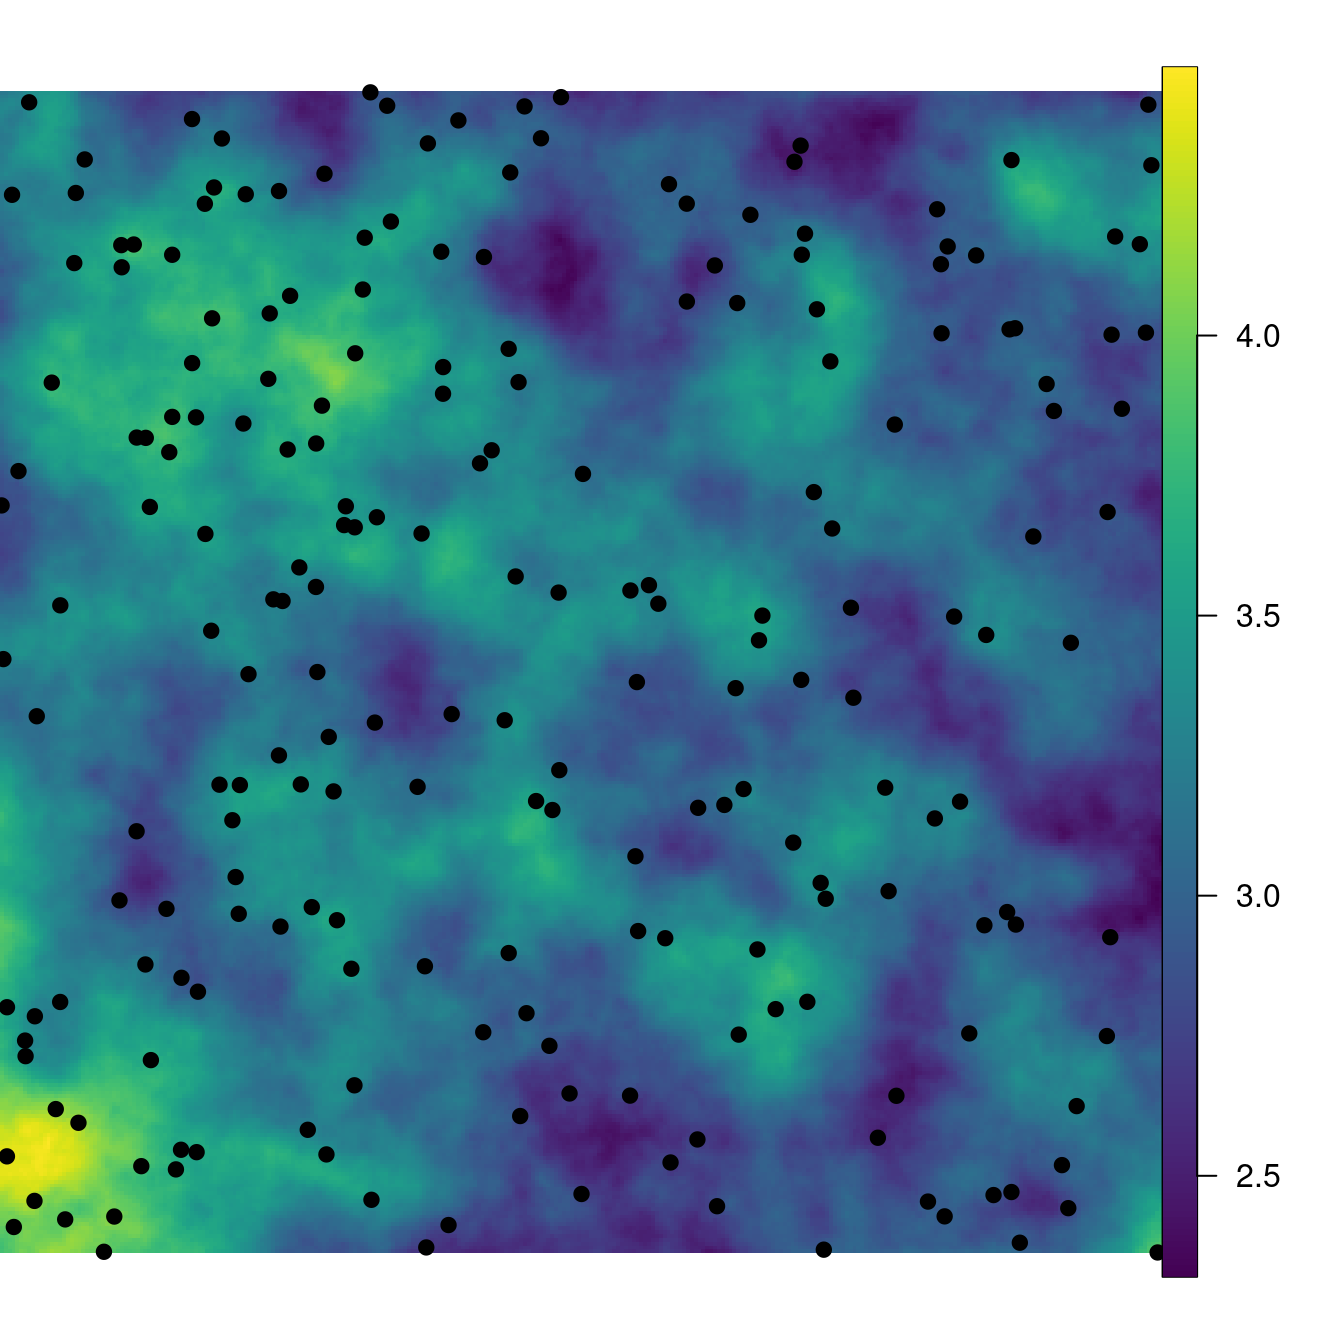 Simulated intensity of the point process and simulated point pattern (black dots).